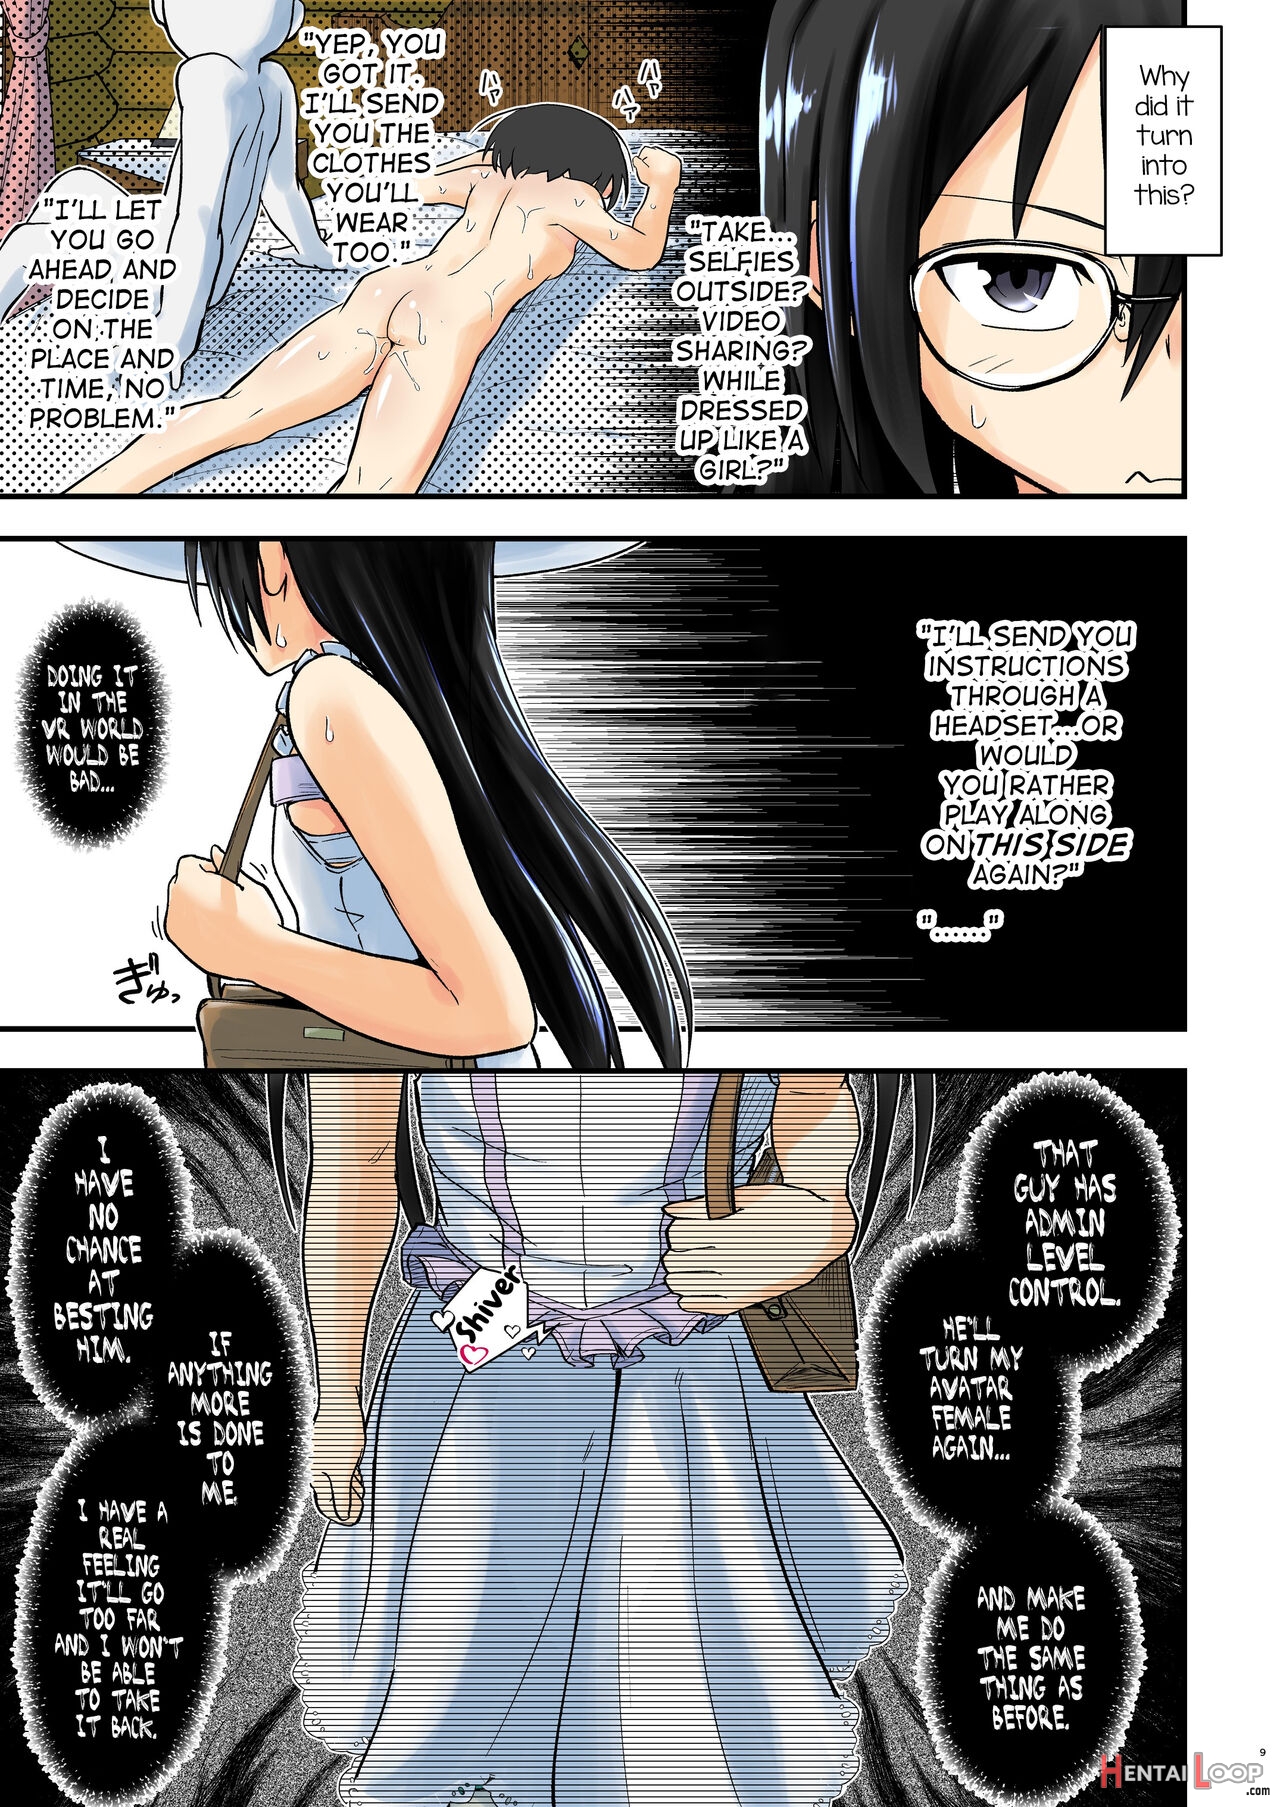 Kiriko Route Another #07 page 9